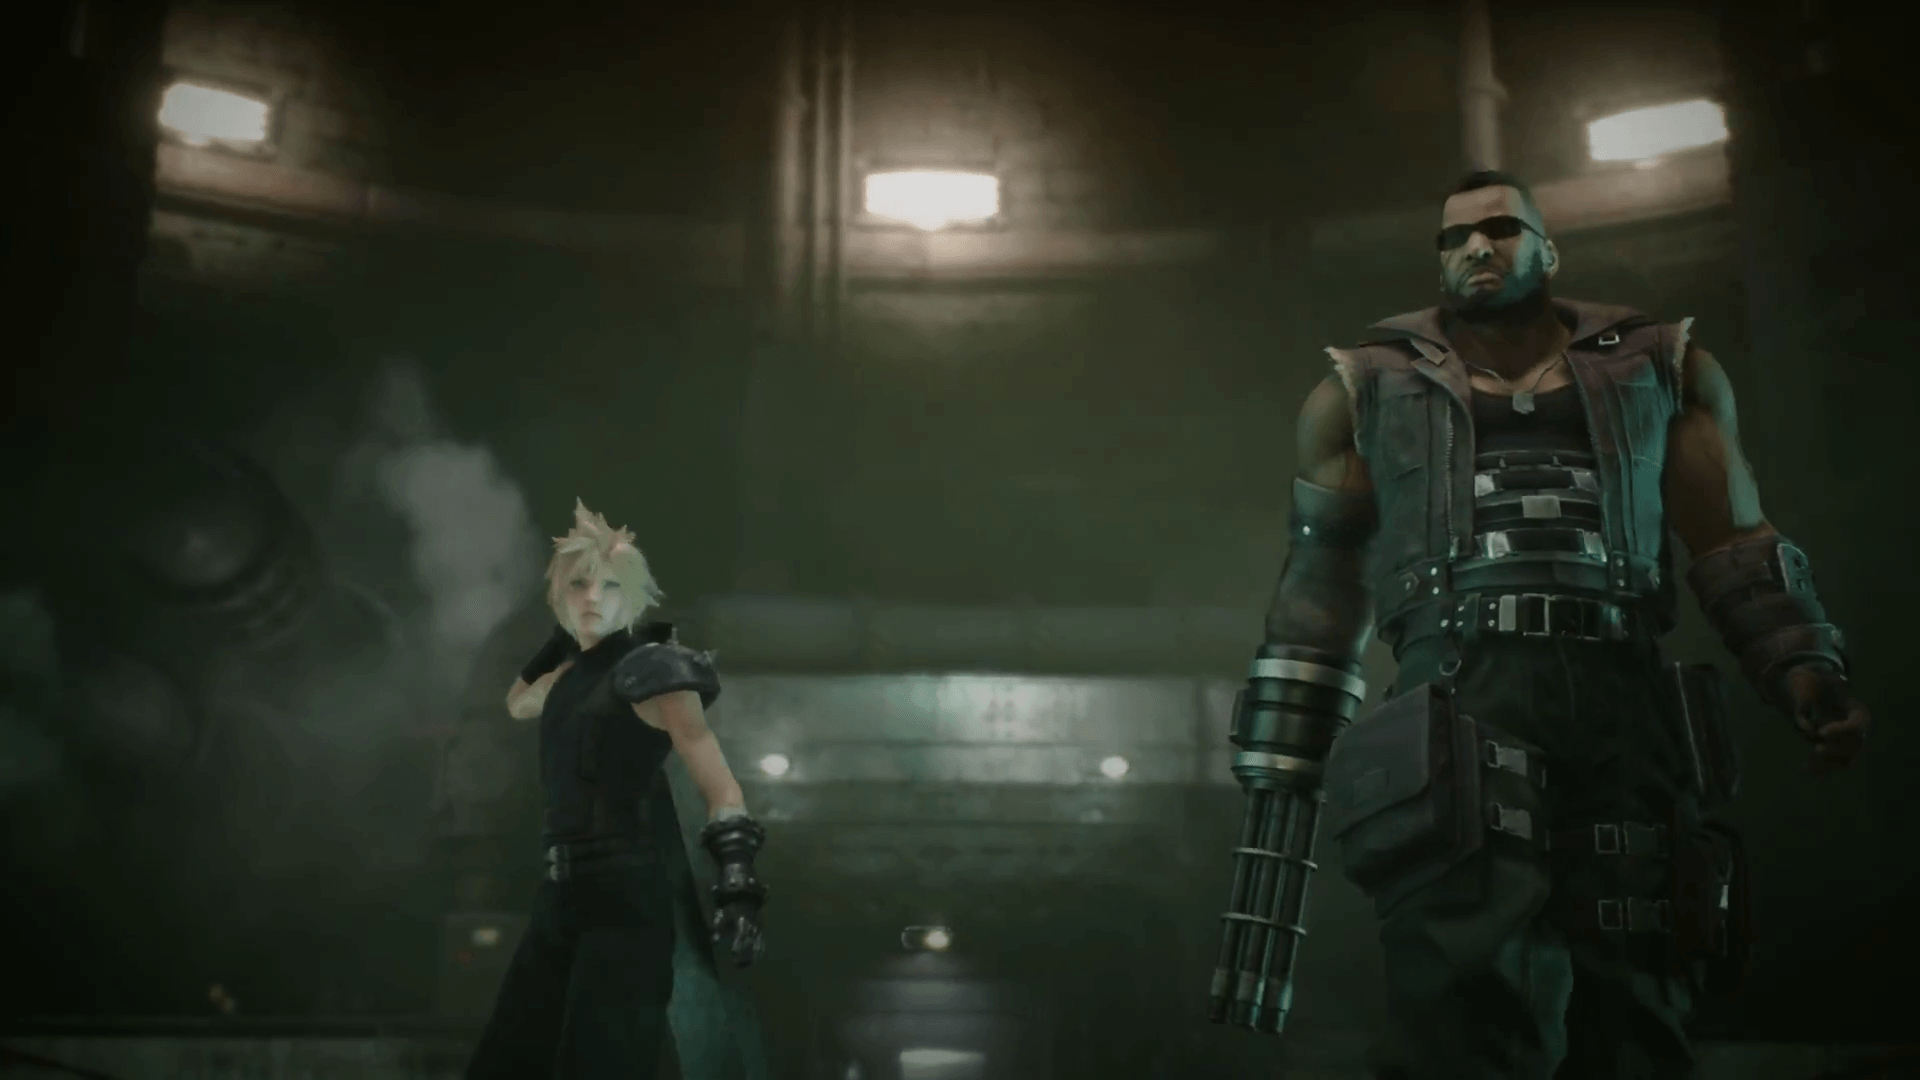 Final Fantasy 7 Remake PlayStation Experience 15 Trailer